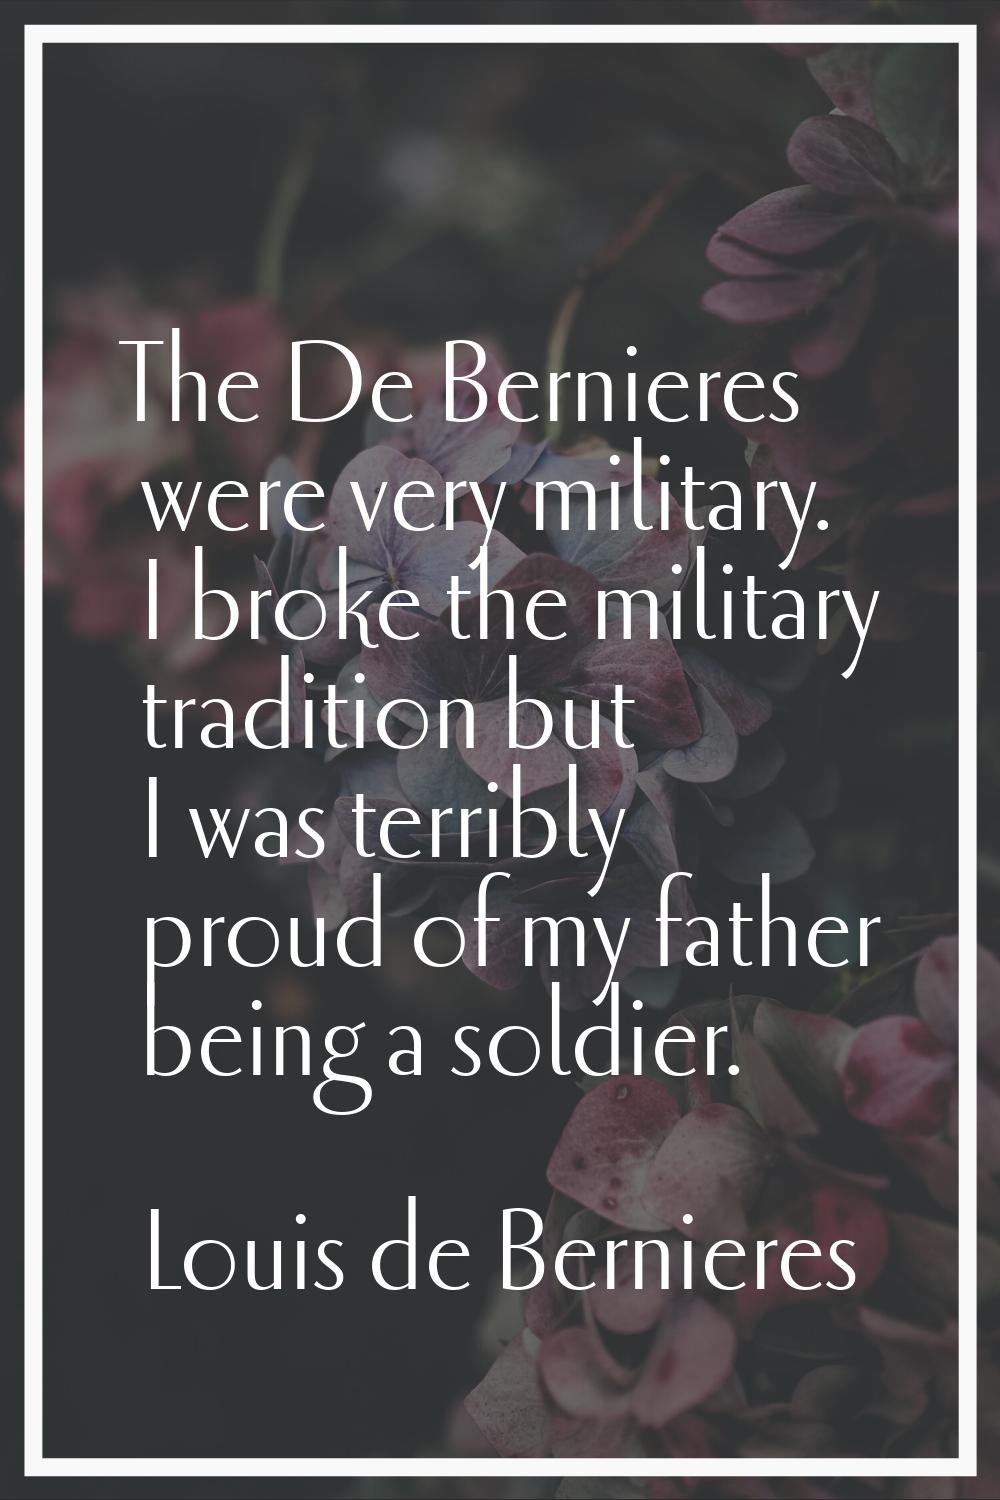 The De Bernieres were very military. I broke the military tradition but I was terribly proud of my 